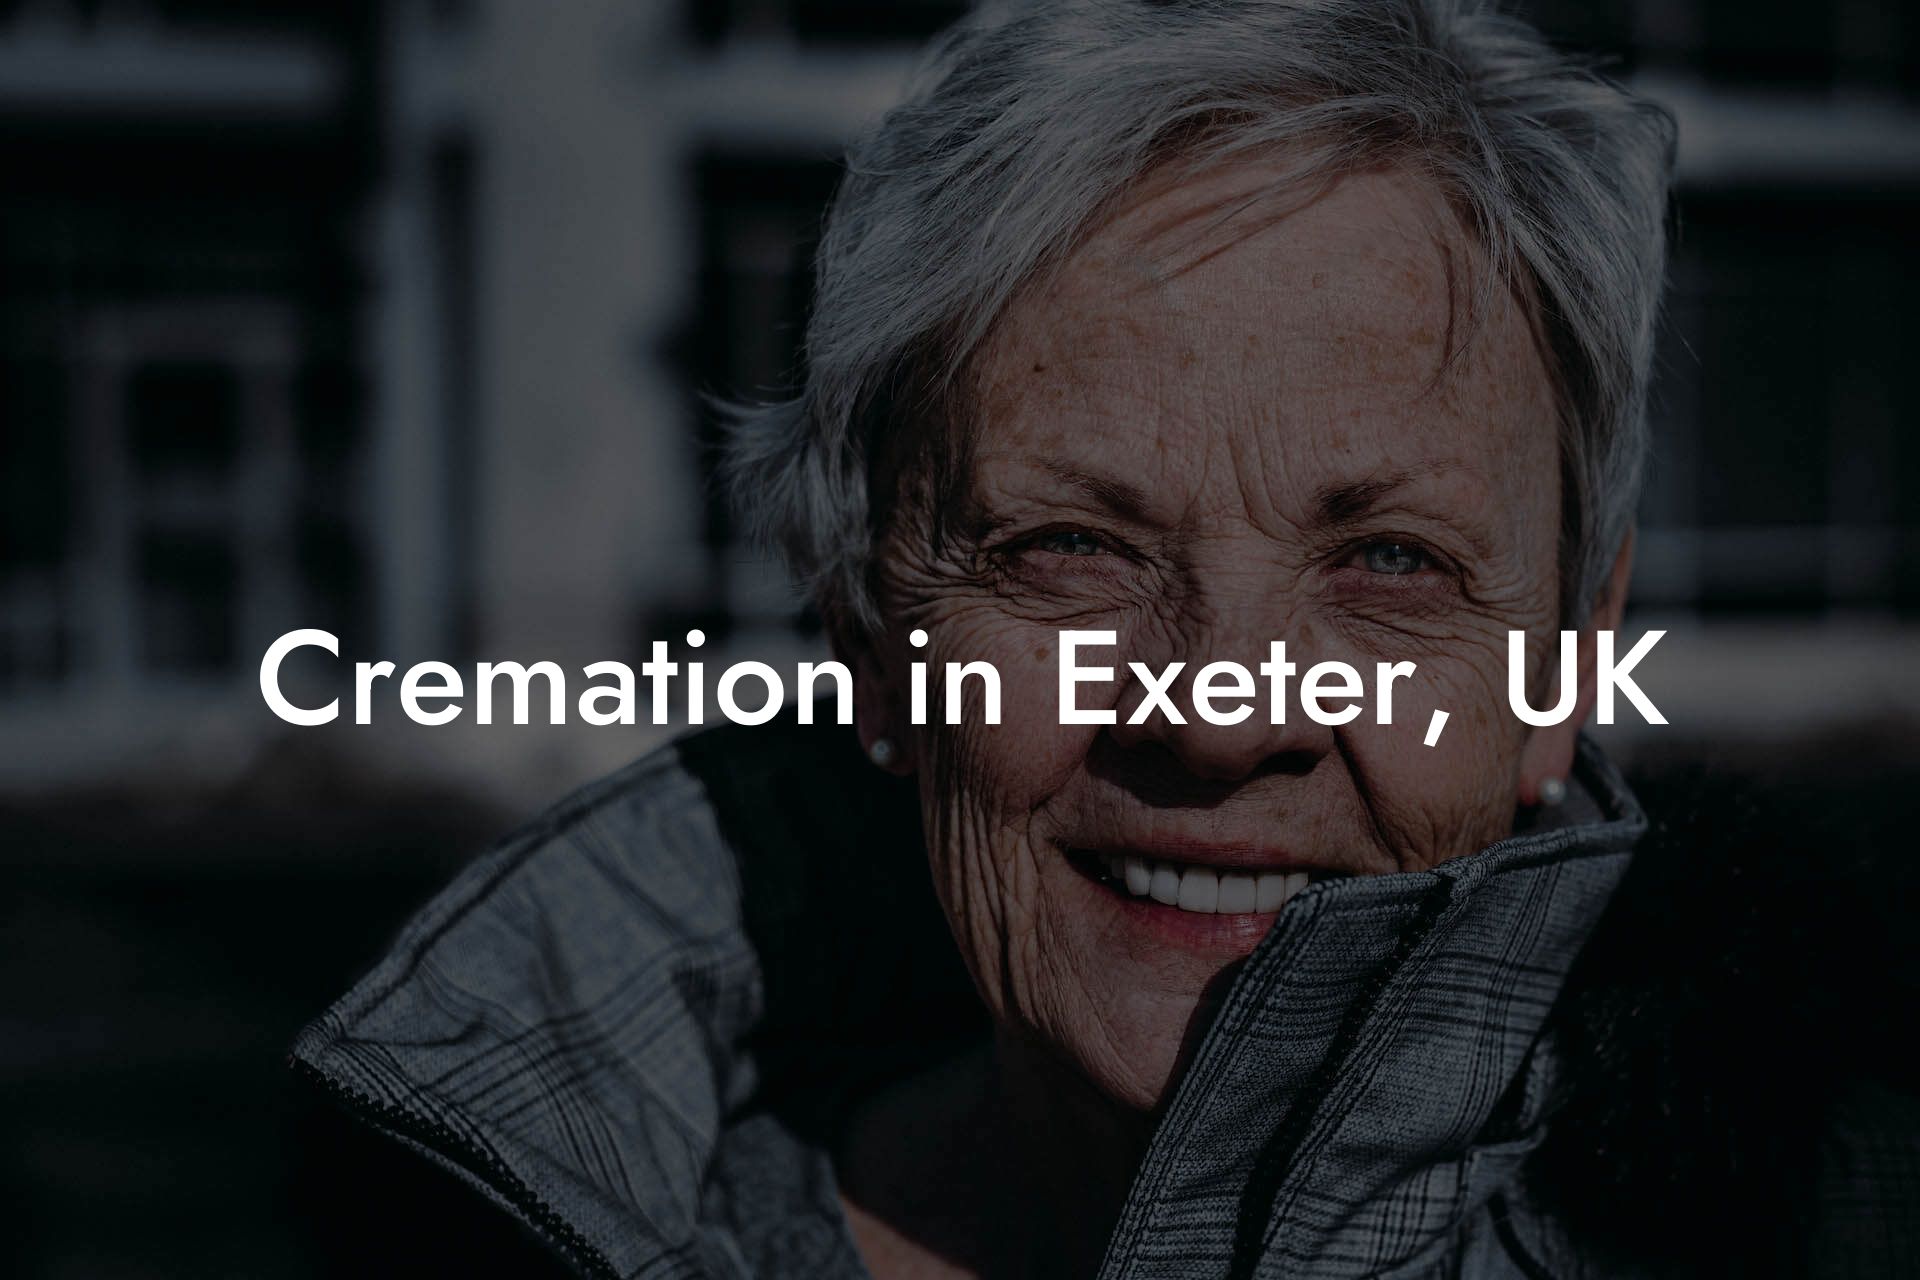 Cremation in Exeter, UK